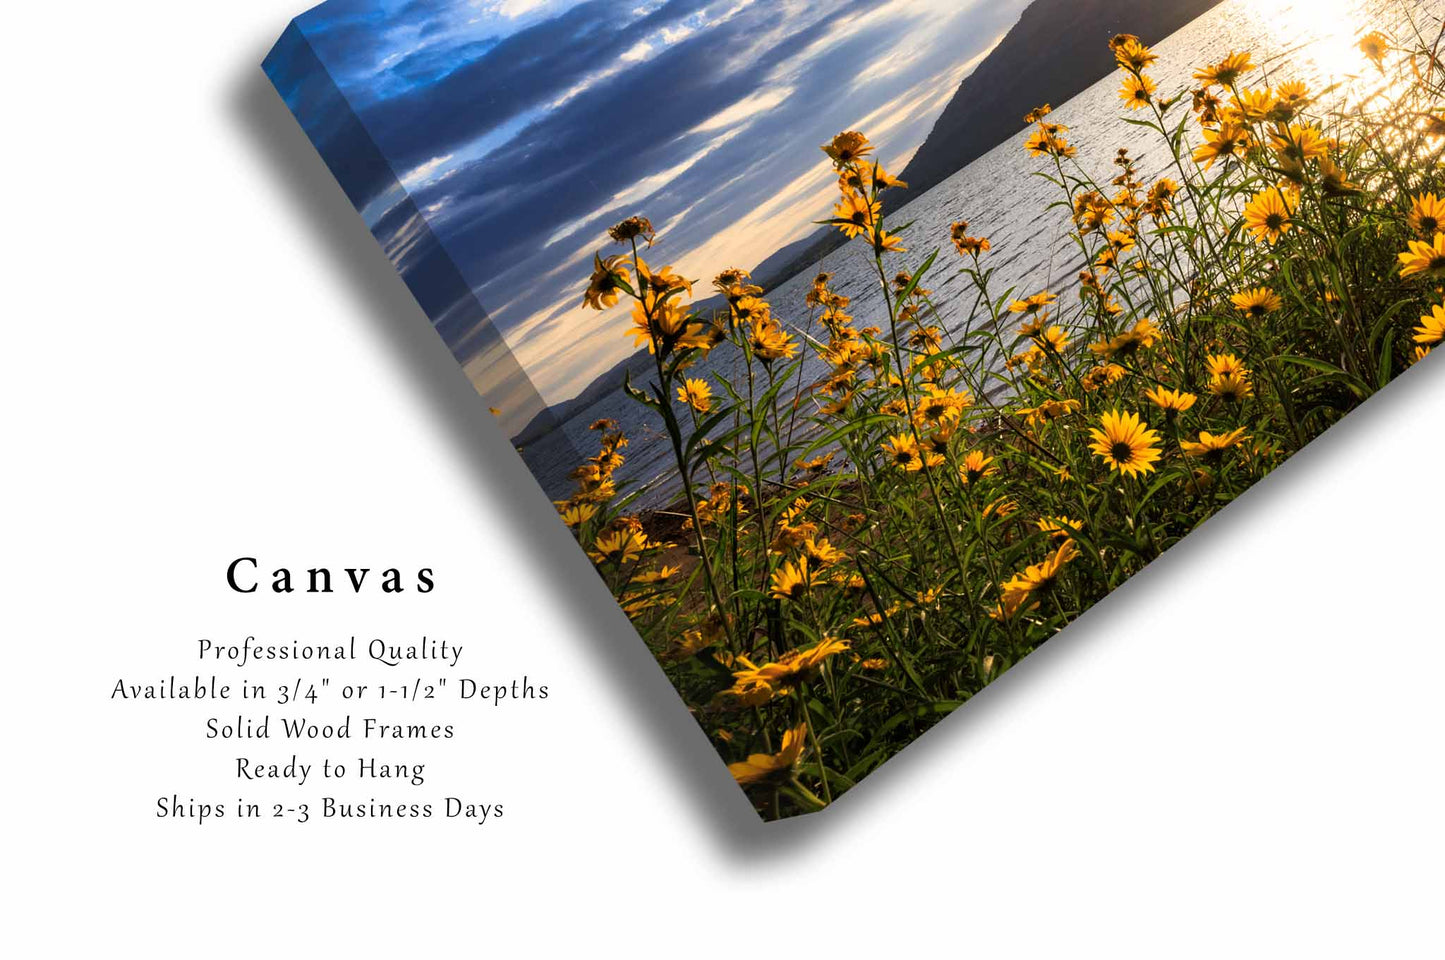 Wichita Mountains Canvas Wall Art (Ready to Hang) Gallery Wrap of Mount Scott and Lake Lawtonka on Autumn Evening in Oklahoma Landscape Photography Nature Decor